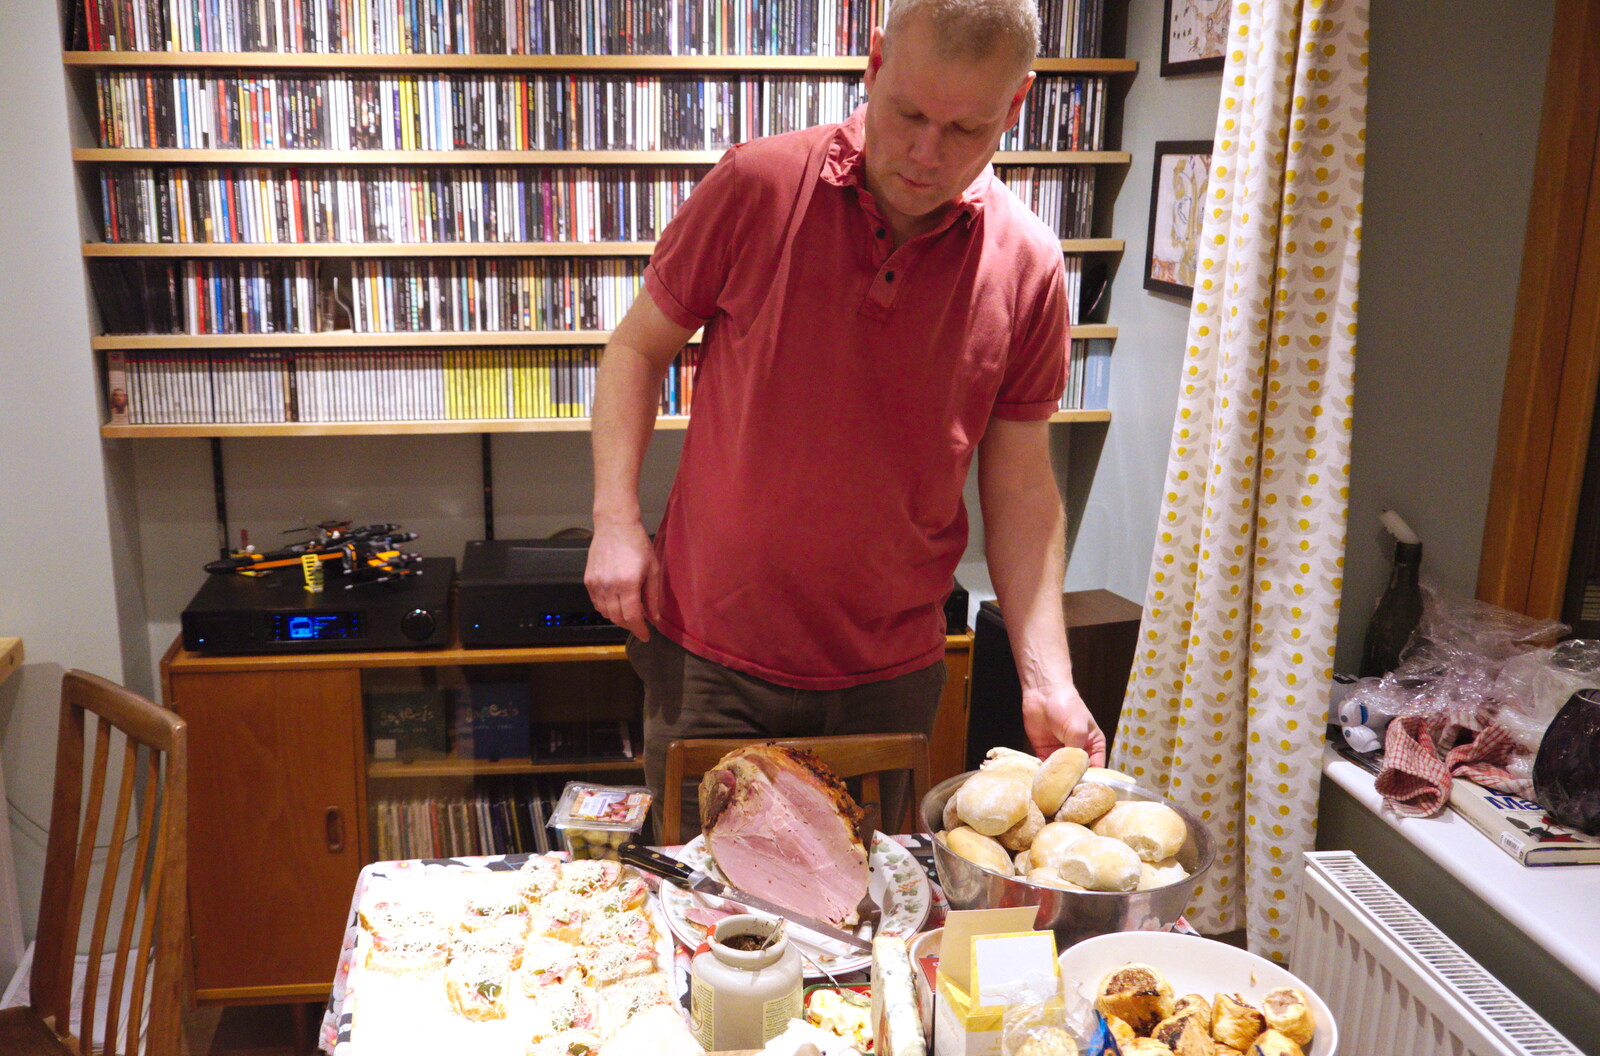 Bill scopes out the food from A New Year's Eve Party, Brome, Suffolk - 31st December 2019